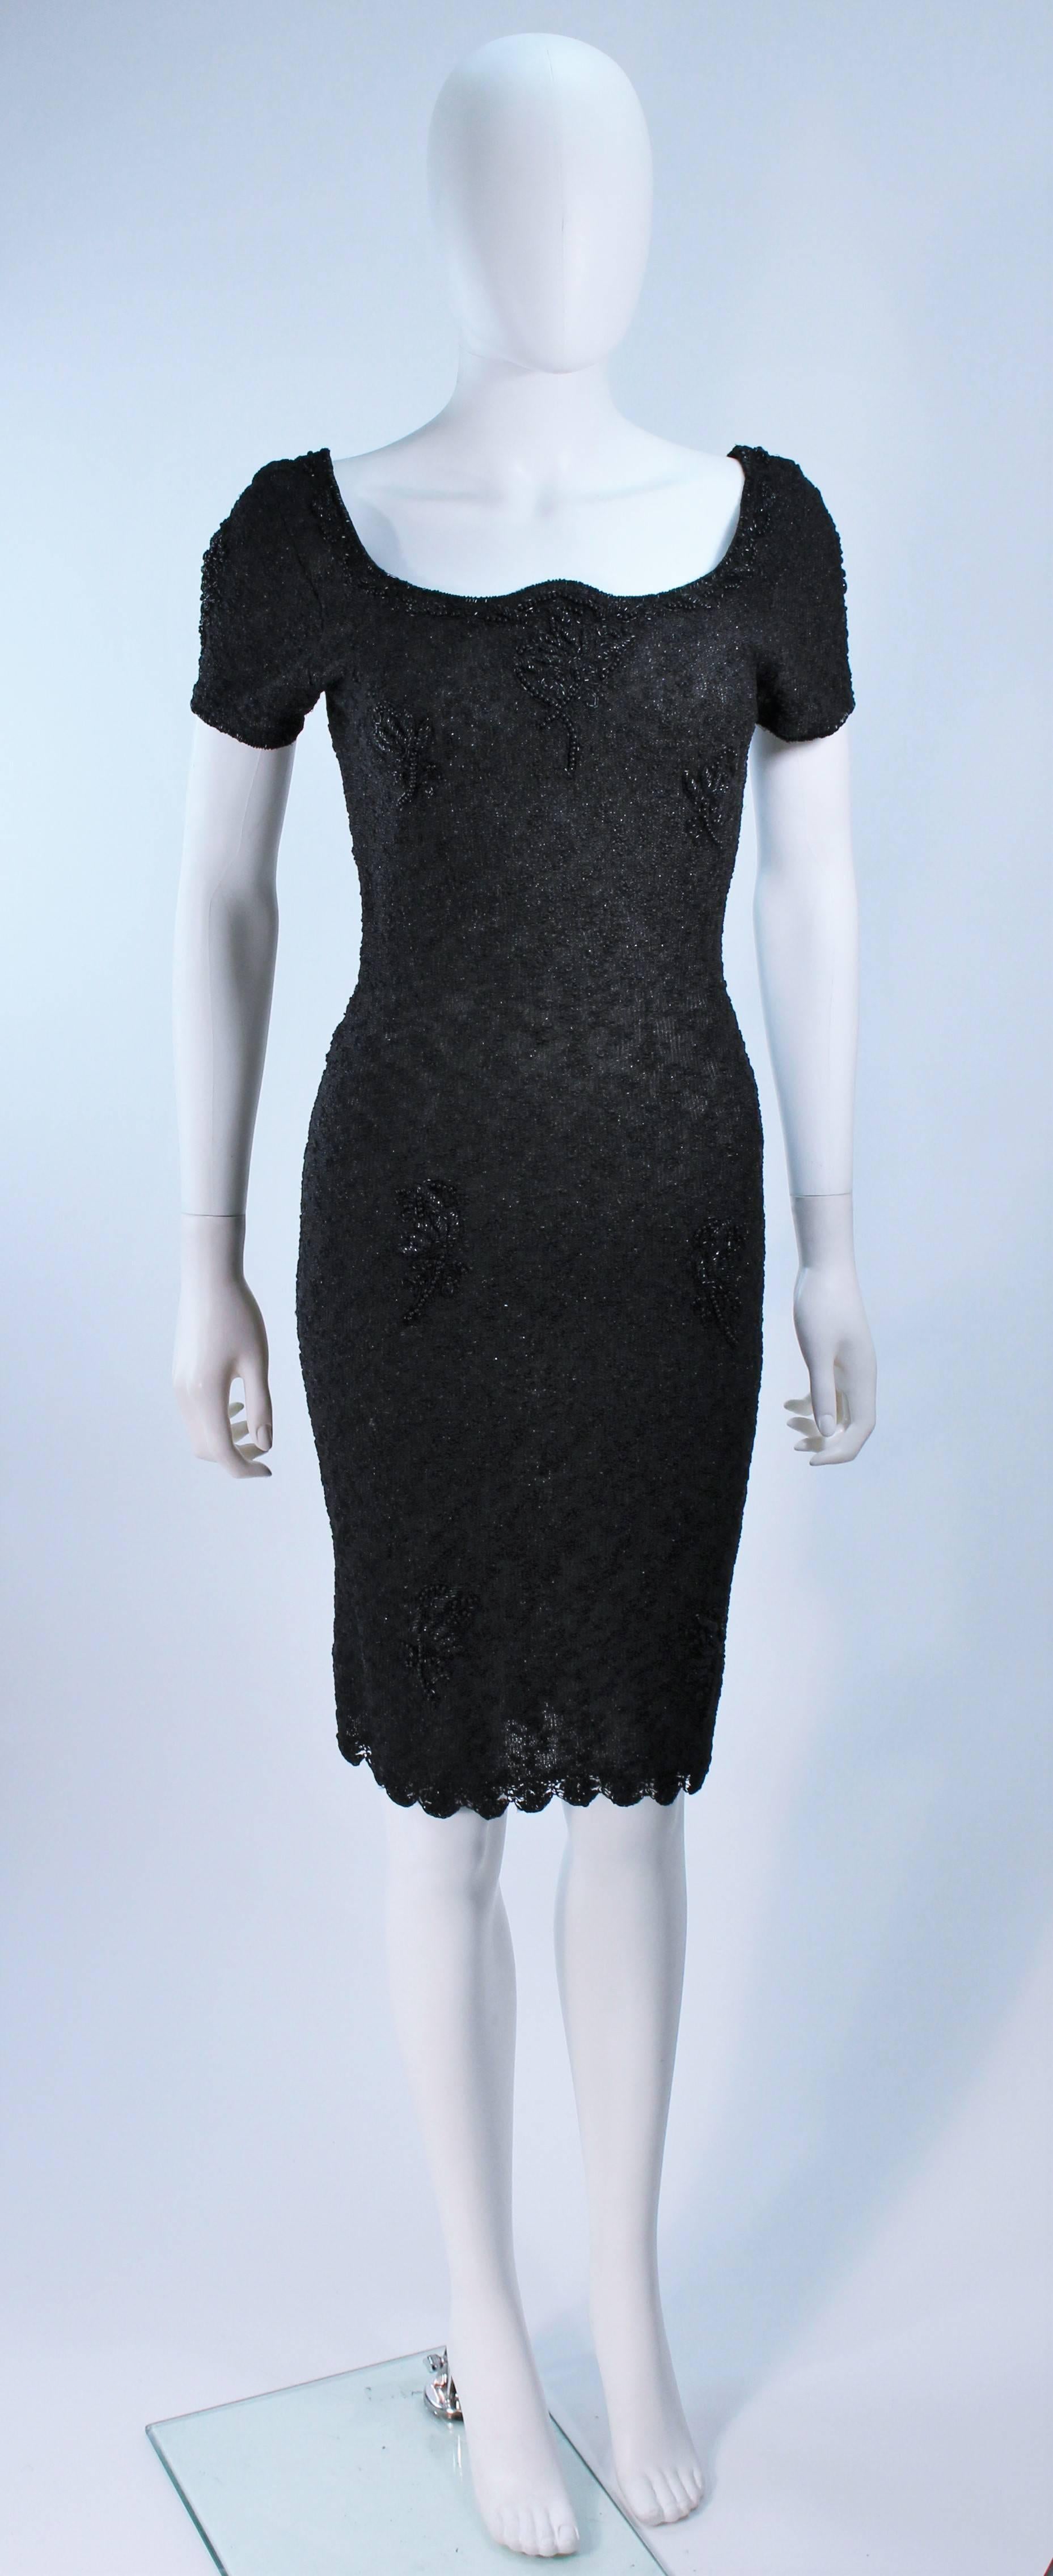  This dress is composed of a black knit wool with beaded applique. Features a pullover style accentuated bust and back with scalloped edge. Semi-sheer. In excellent vintage condition. 

  **Please cross-reference measurements for personal